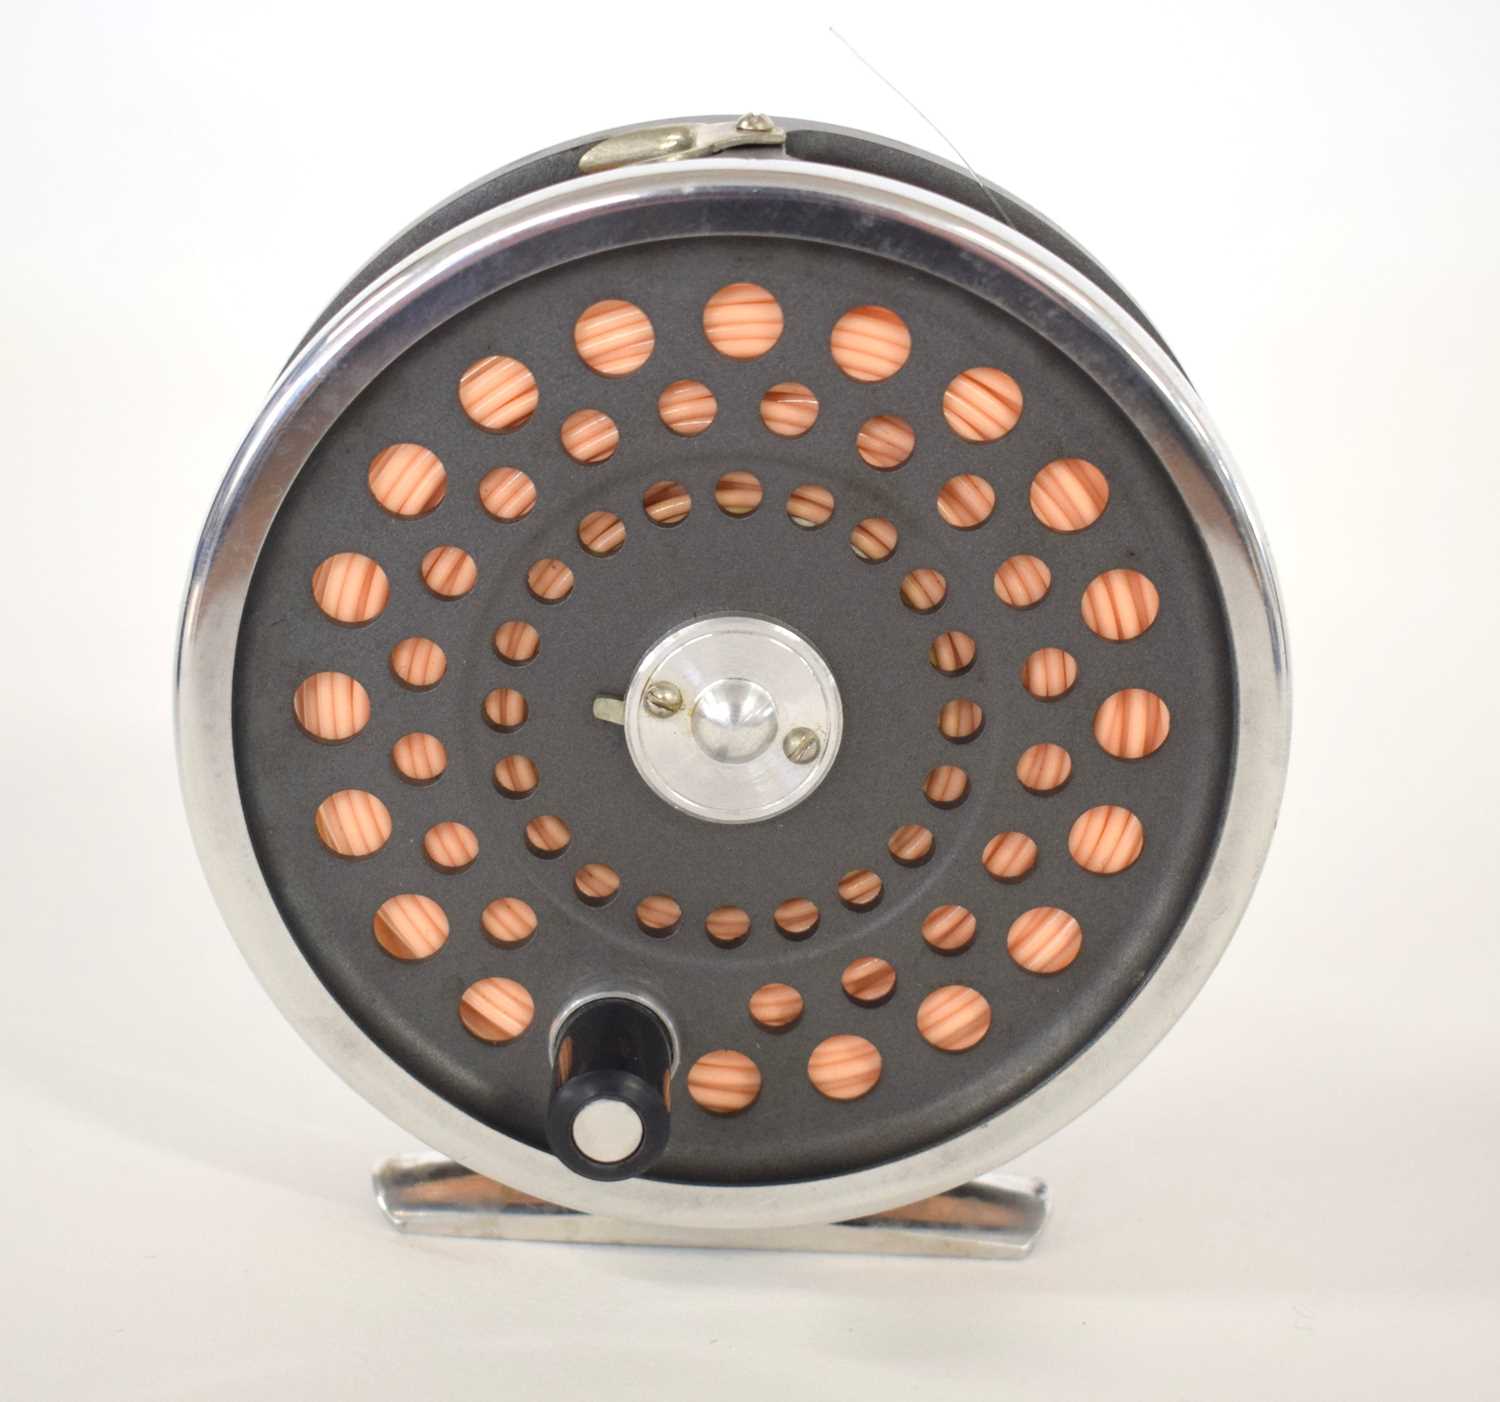 ‘Marquis’ No.8/9, 3 5/8” trout fly reel made by Hardy Bros LTD in house of hardy zip padded case. - Image 3 of 6